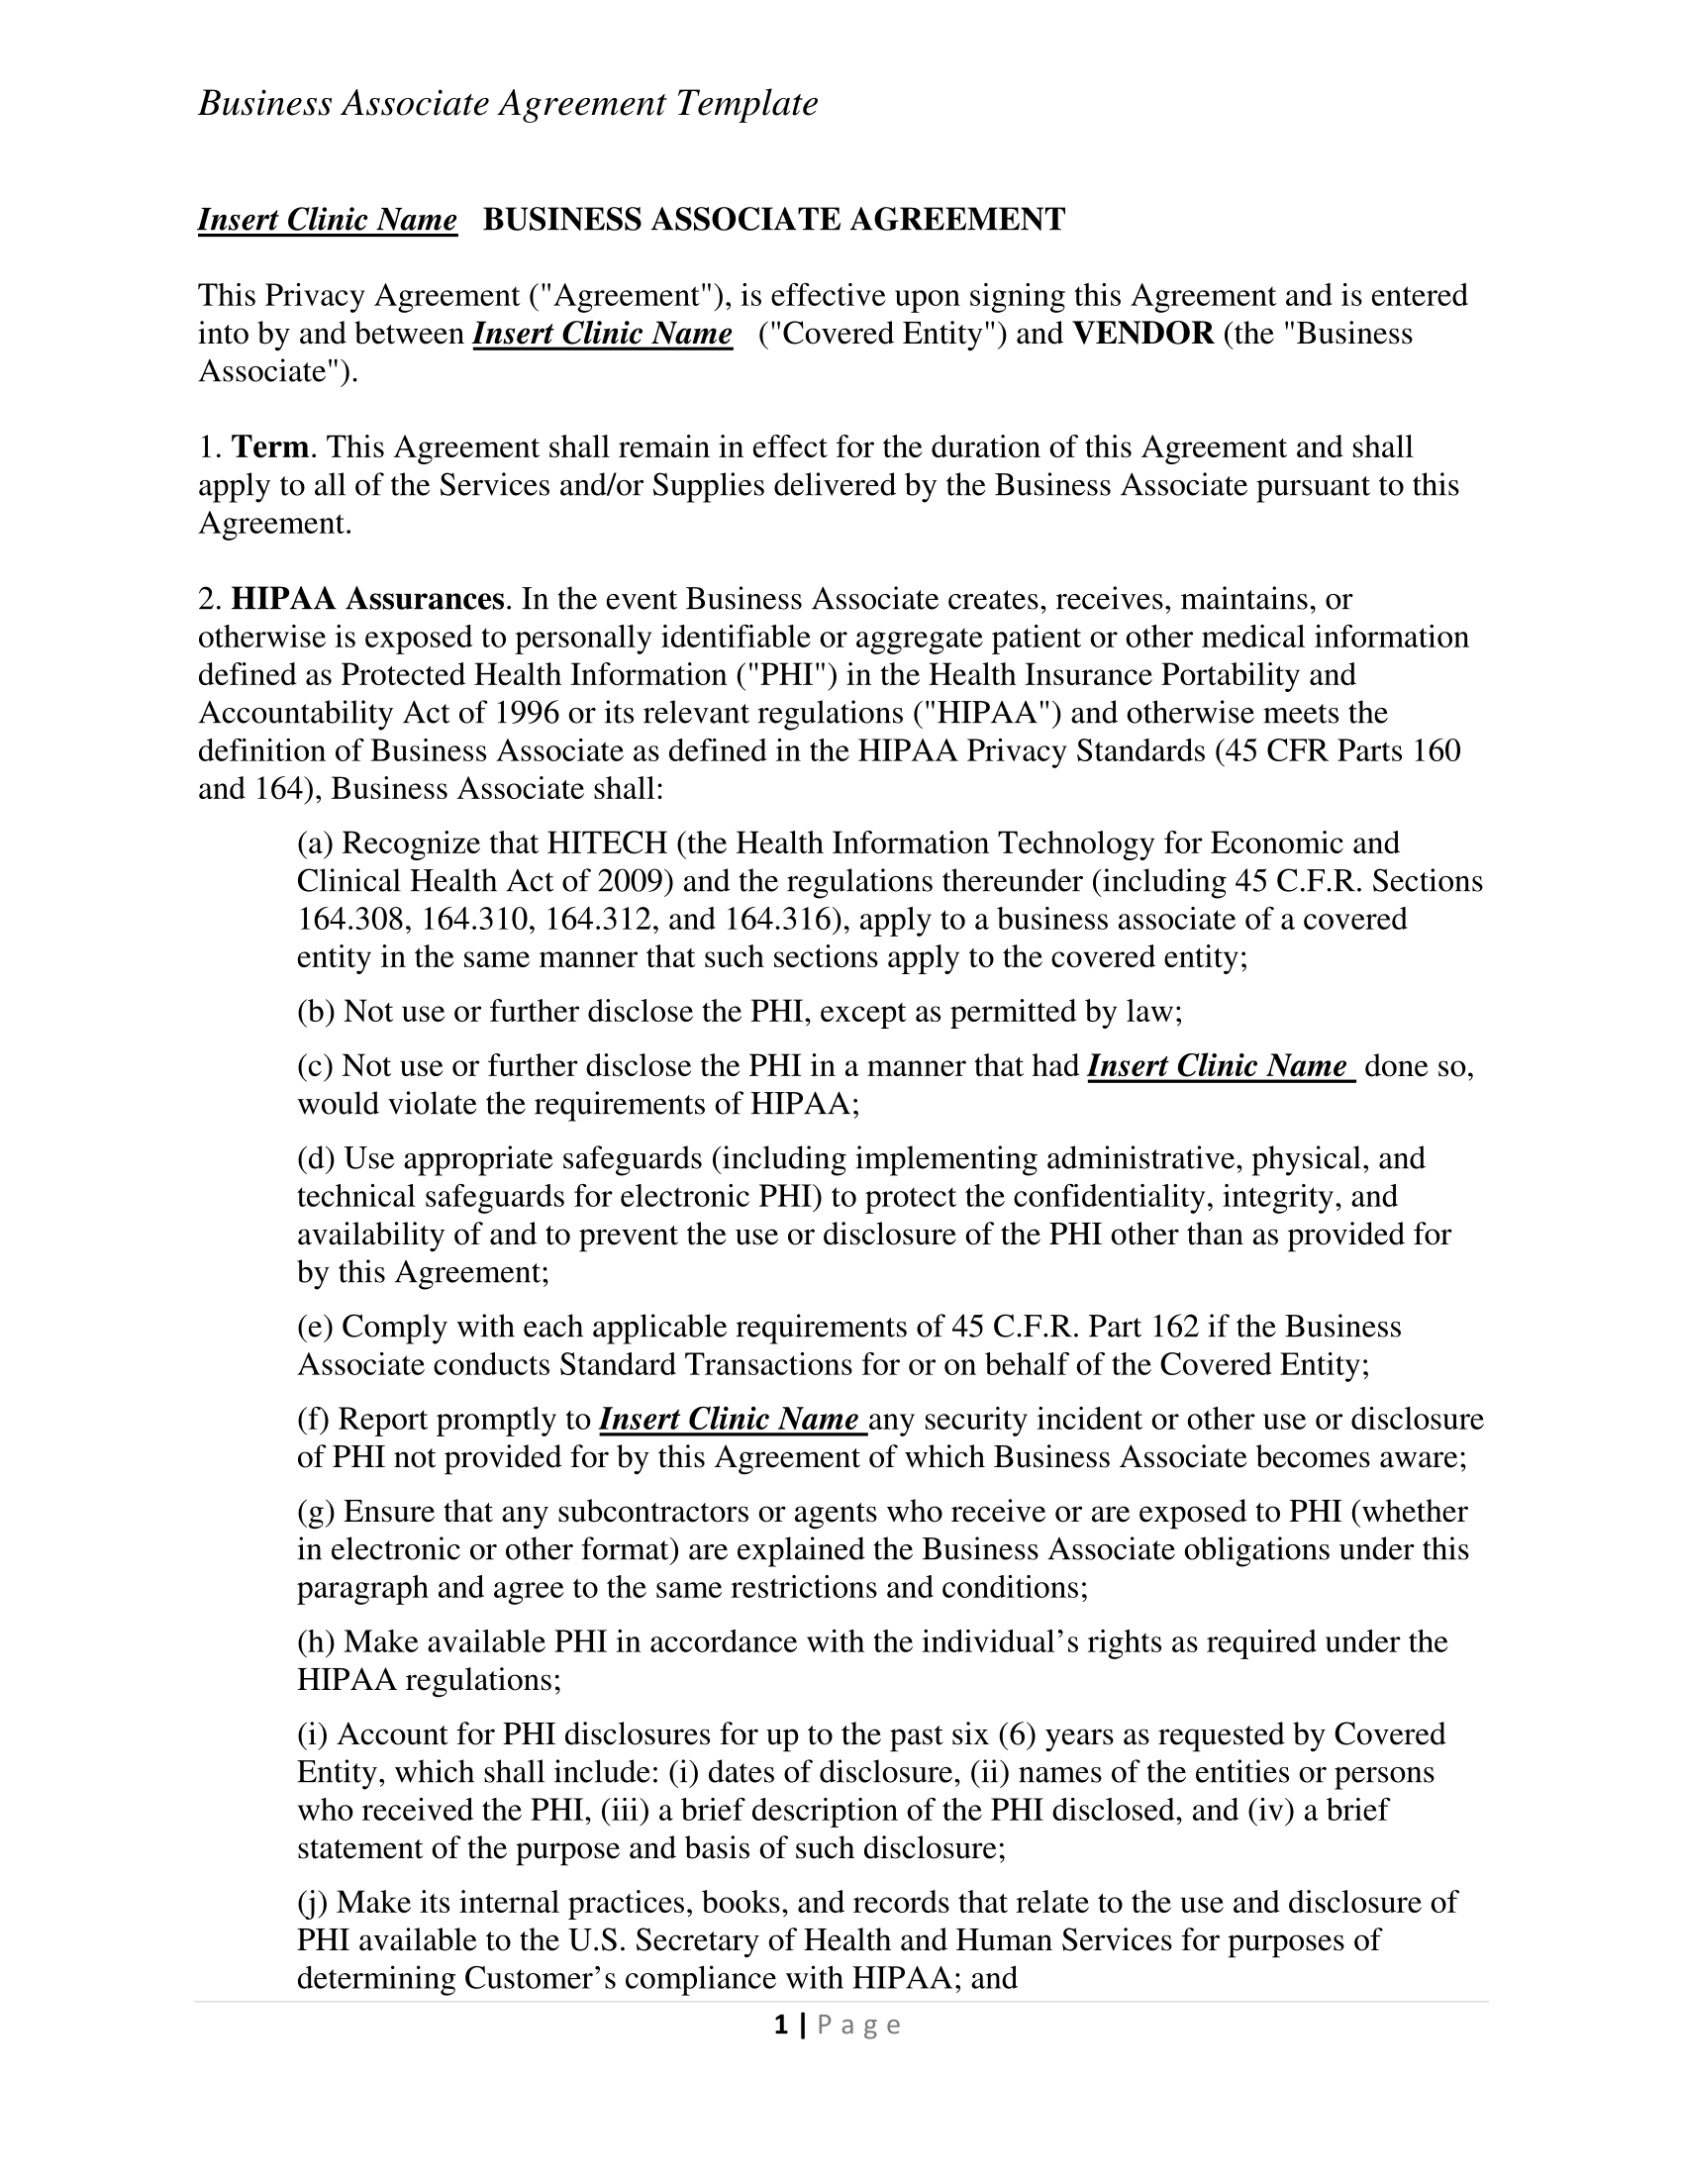 Legal Binding Contract Template | Resume Examples with regard to Legal Binding Contract Template